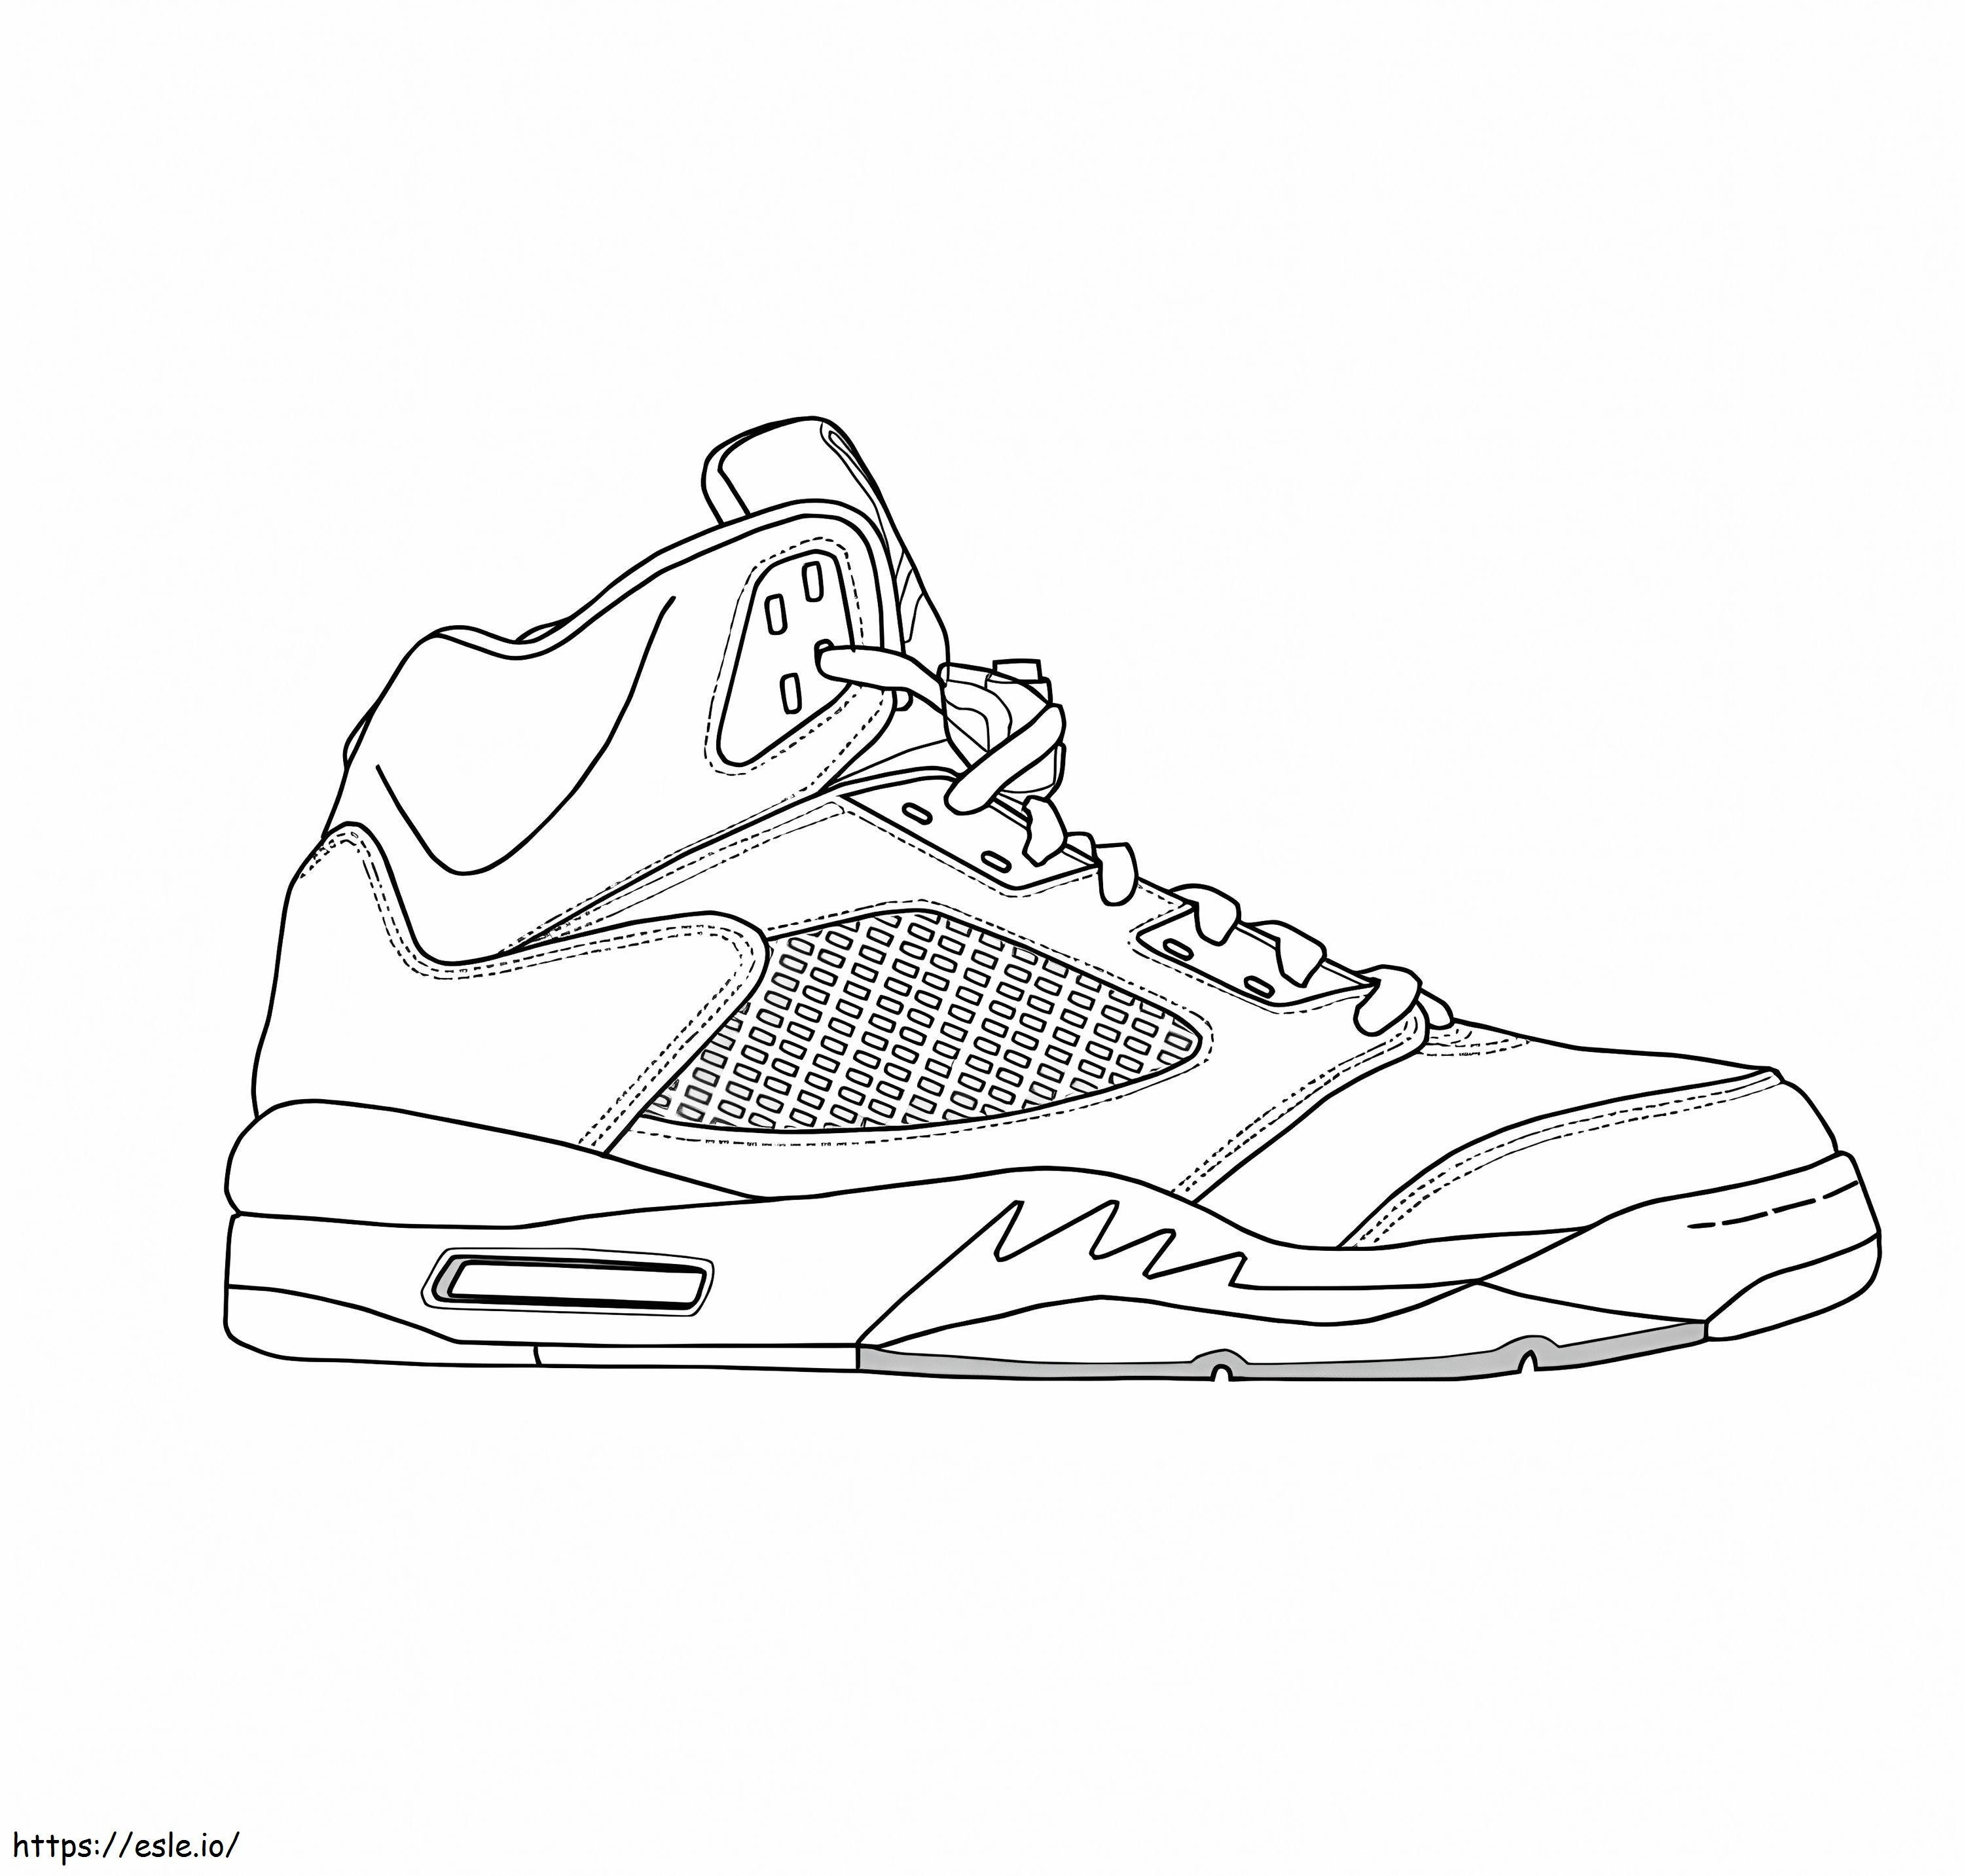 Normal Shoes coloring page